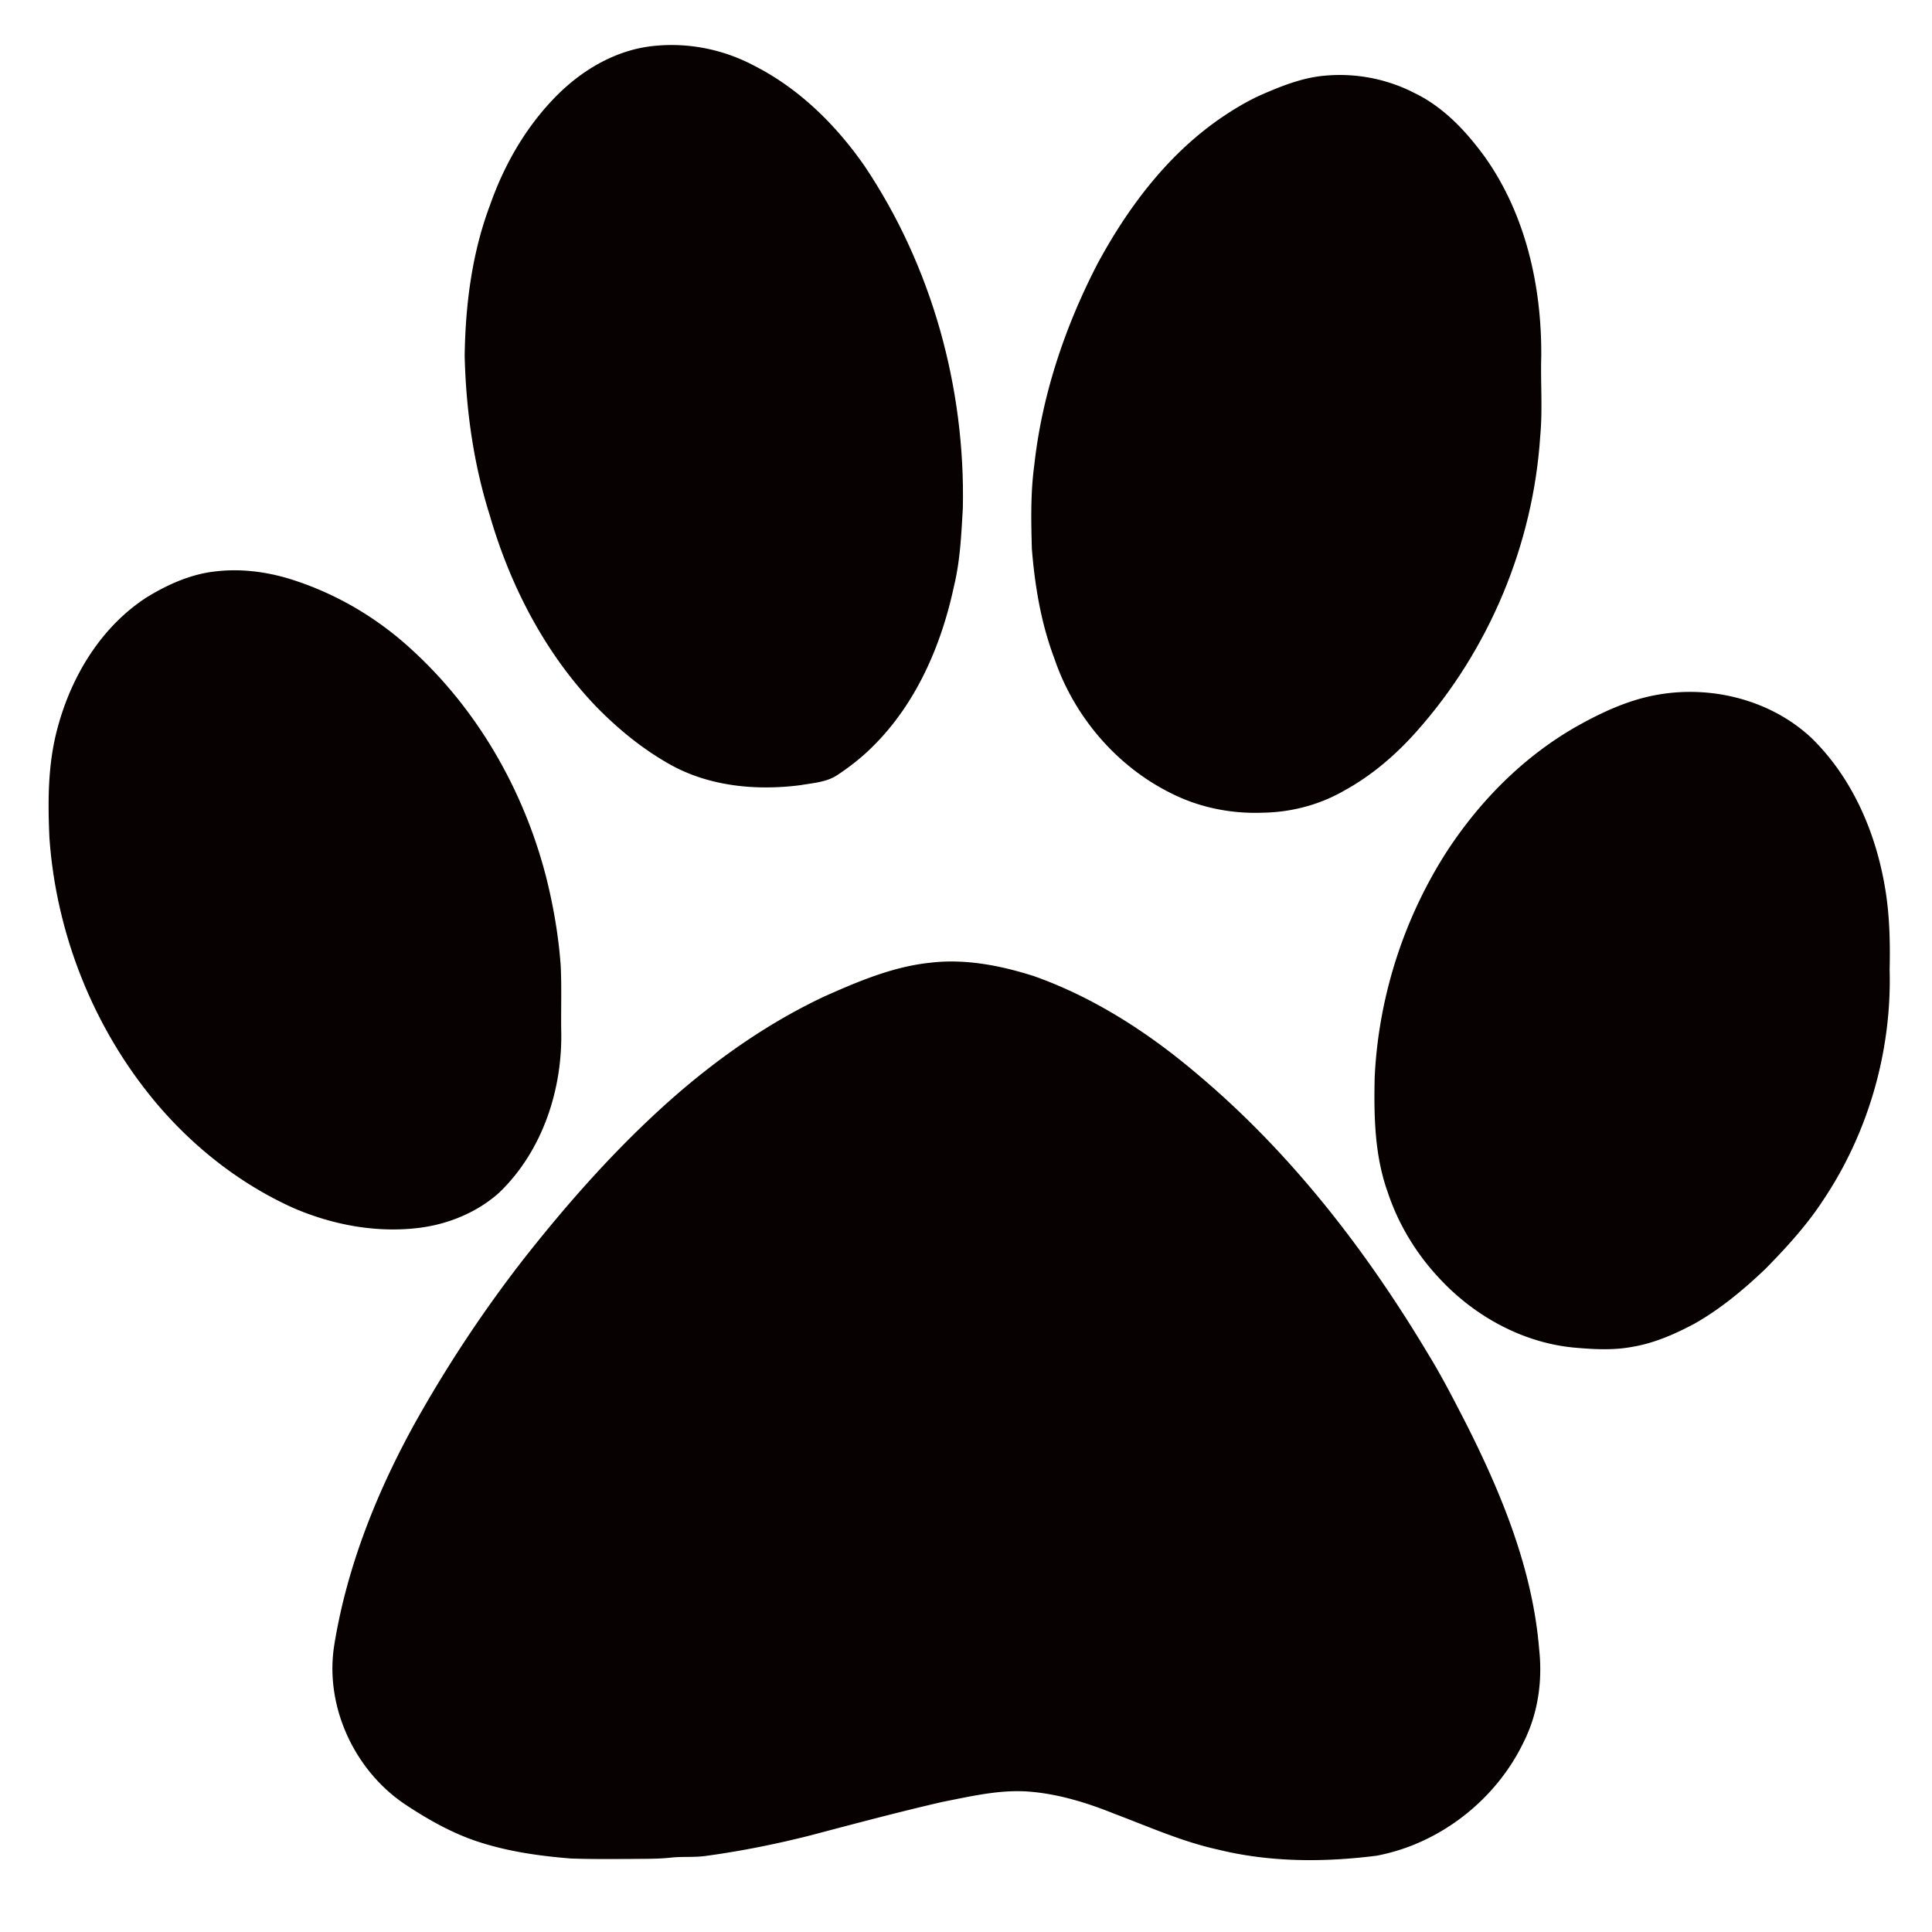 Clipart paw